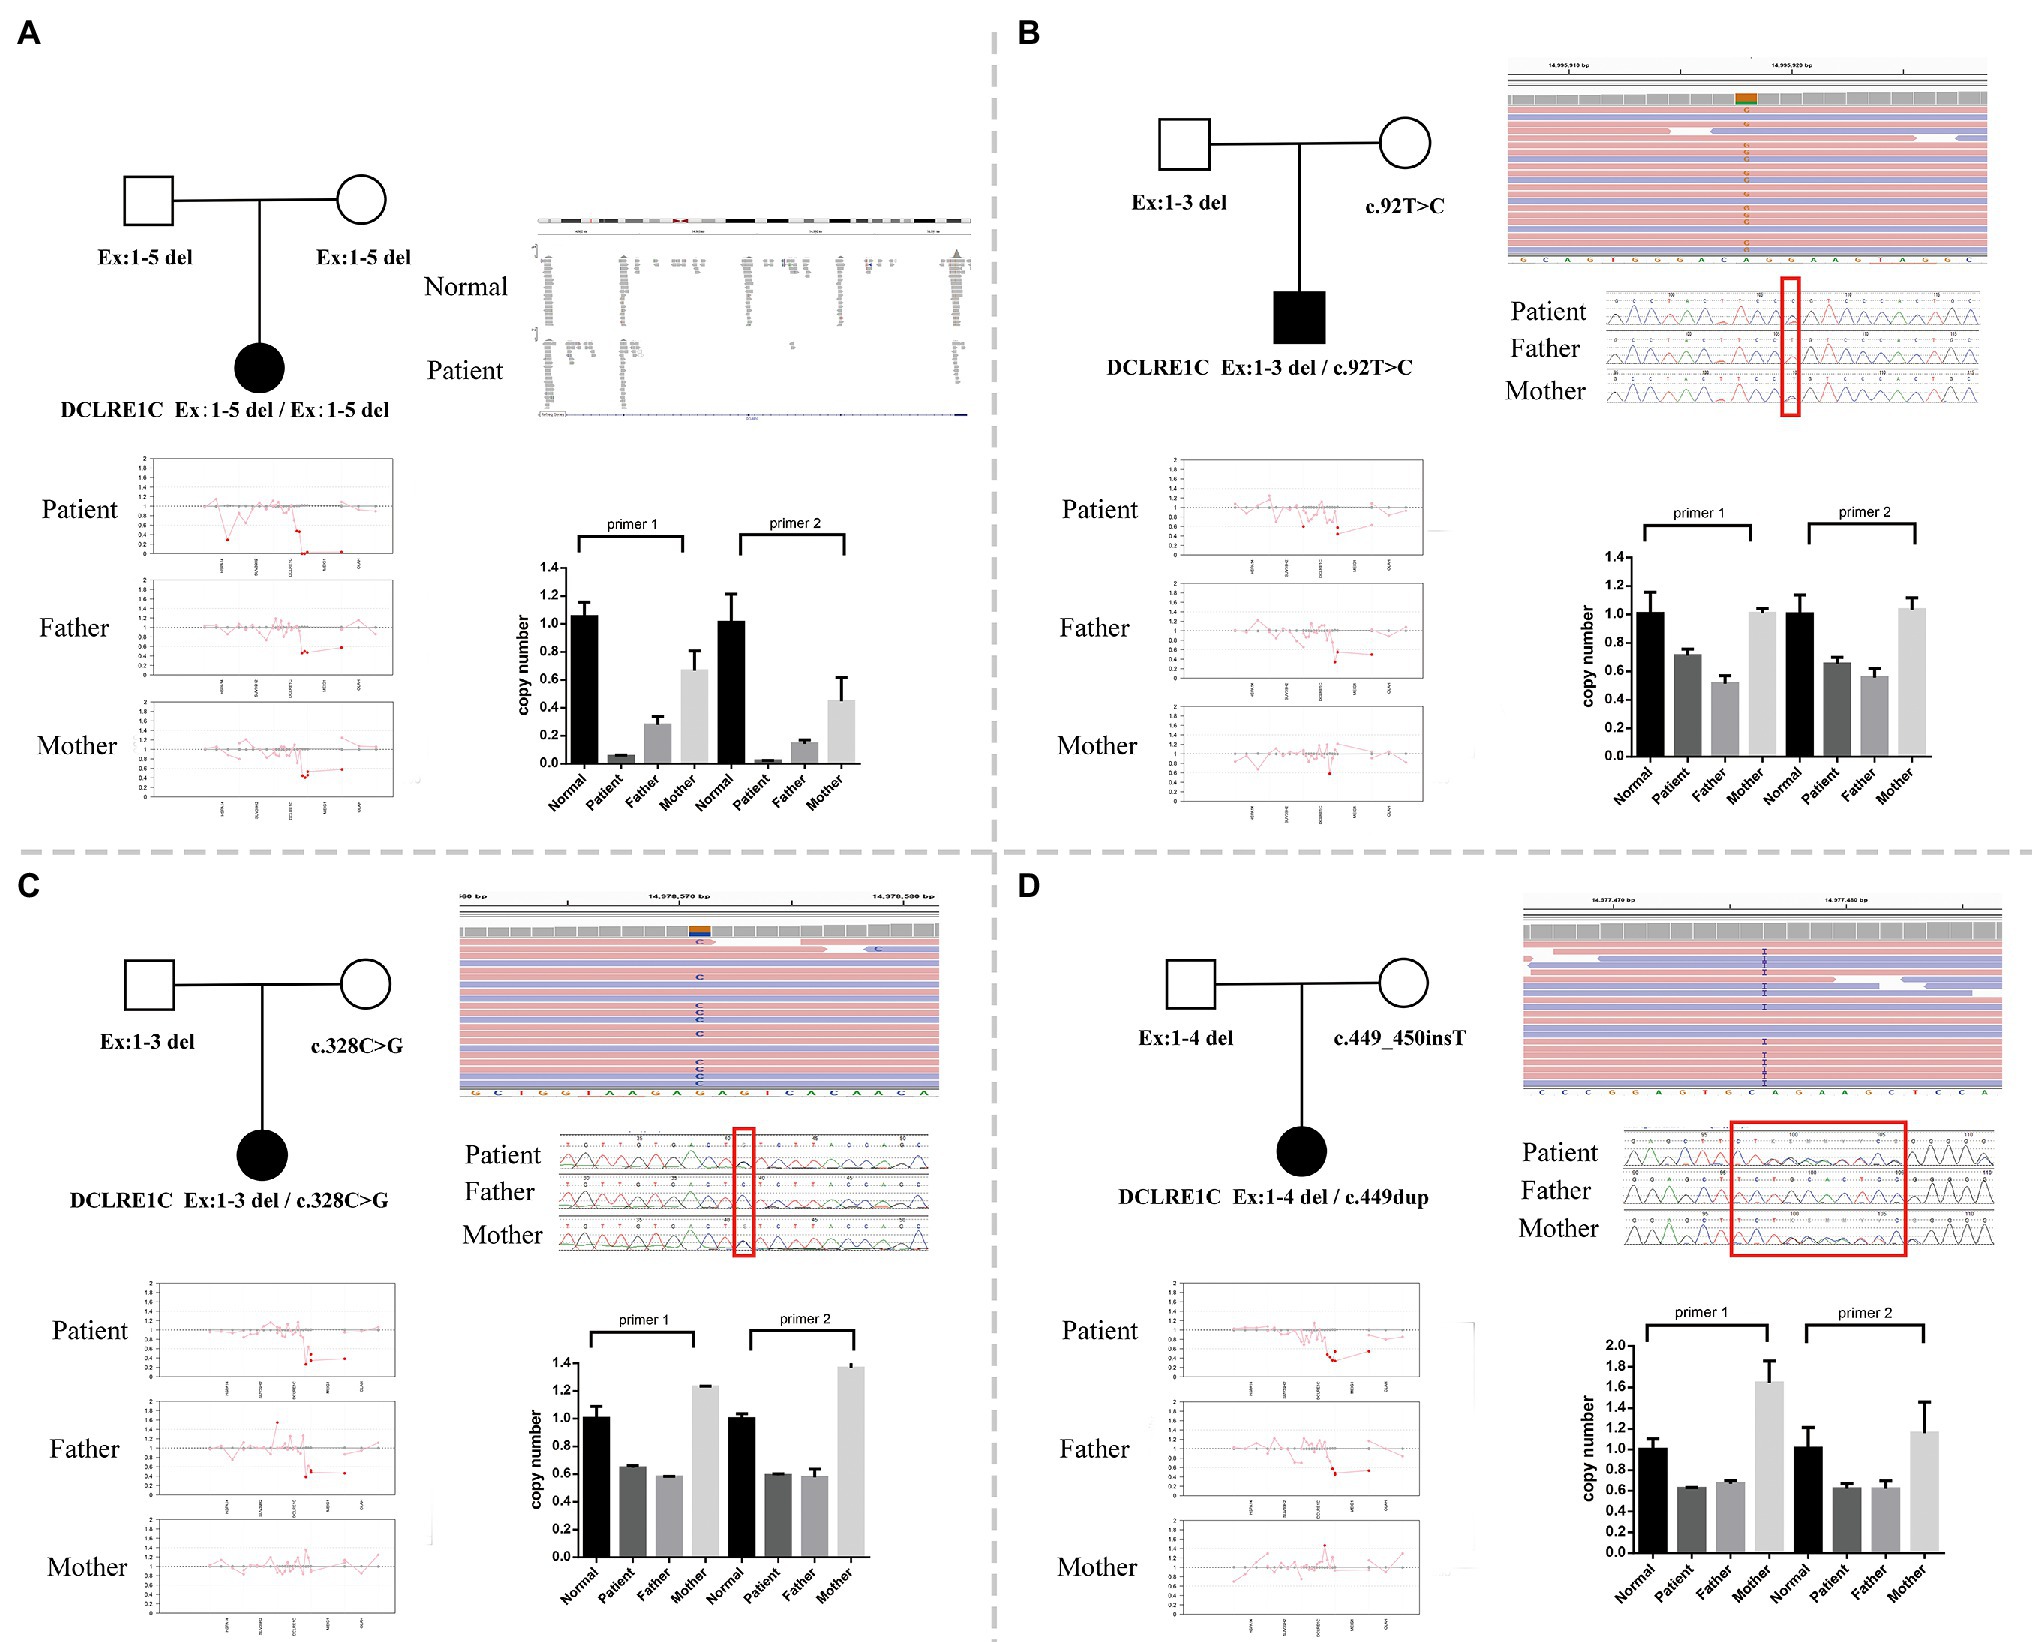 Frontiers | High-Frequency Exon Deletion DNA Cross-Link Repair 1C Accounting for Severe Combined Immunodeficiency May Be Missed by Whole-Exome Sequencing